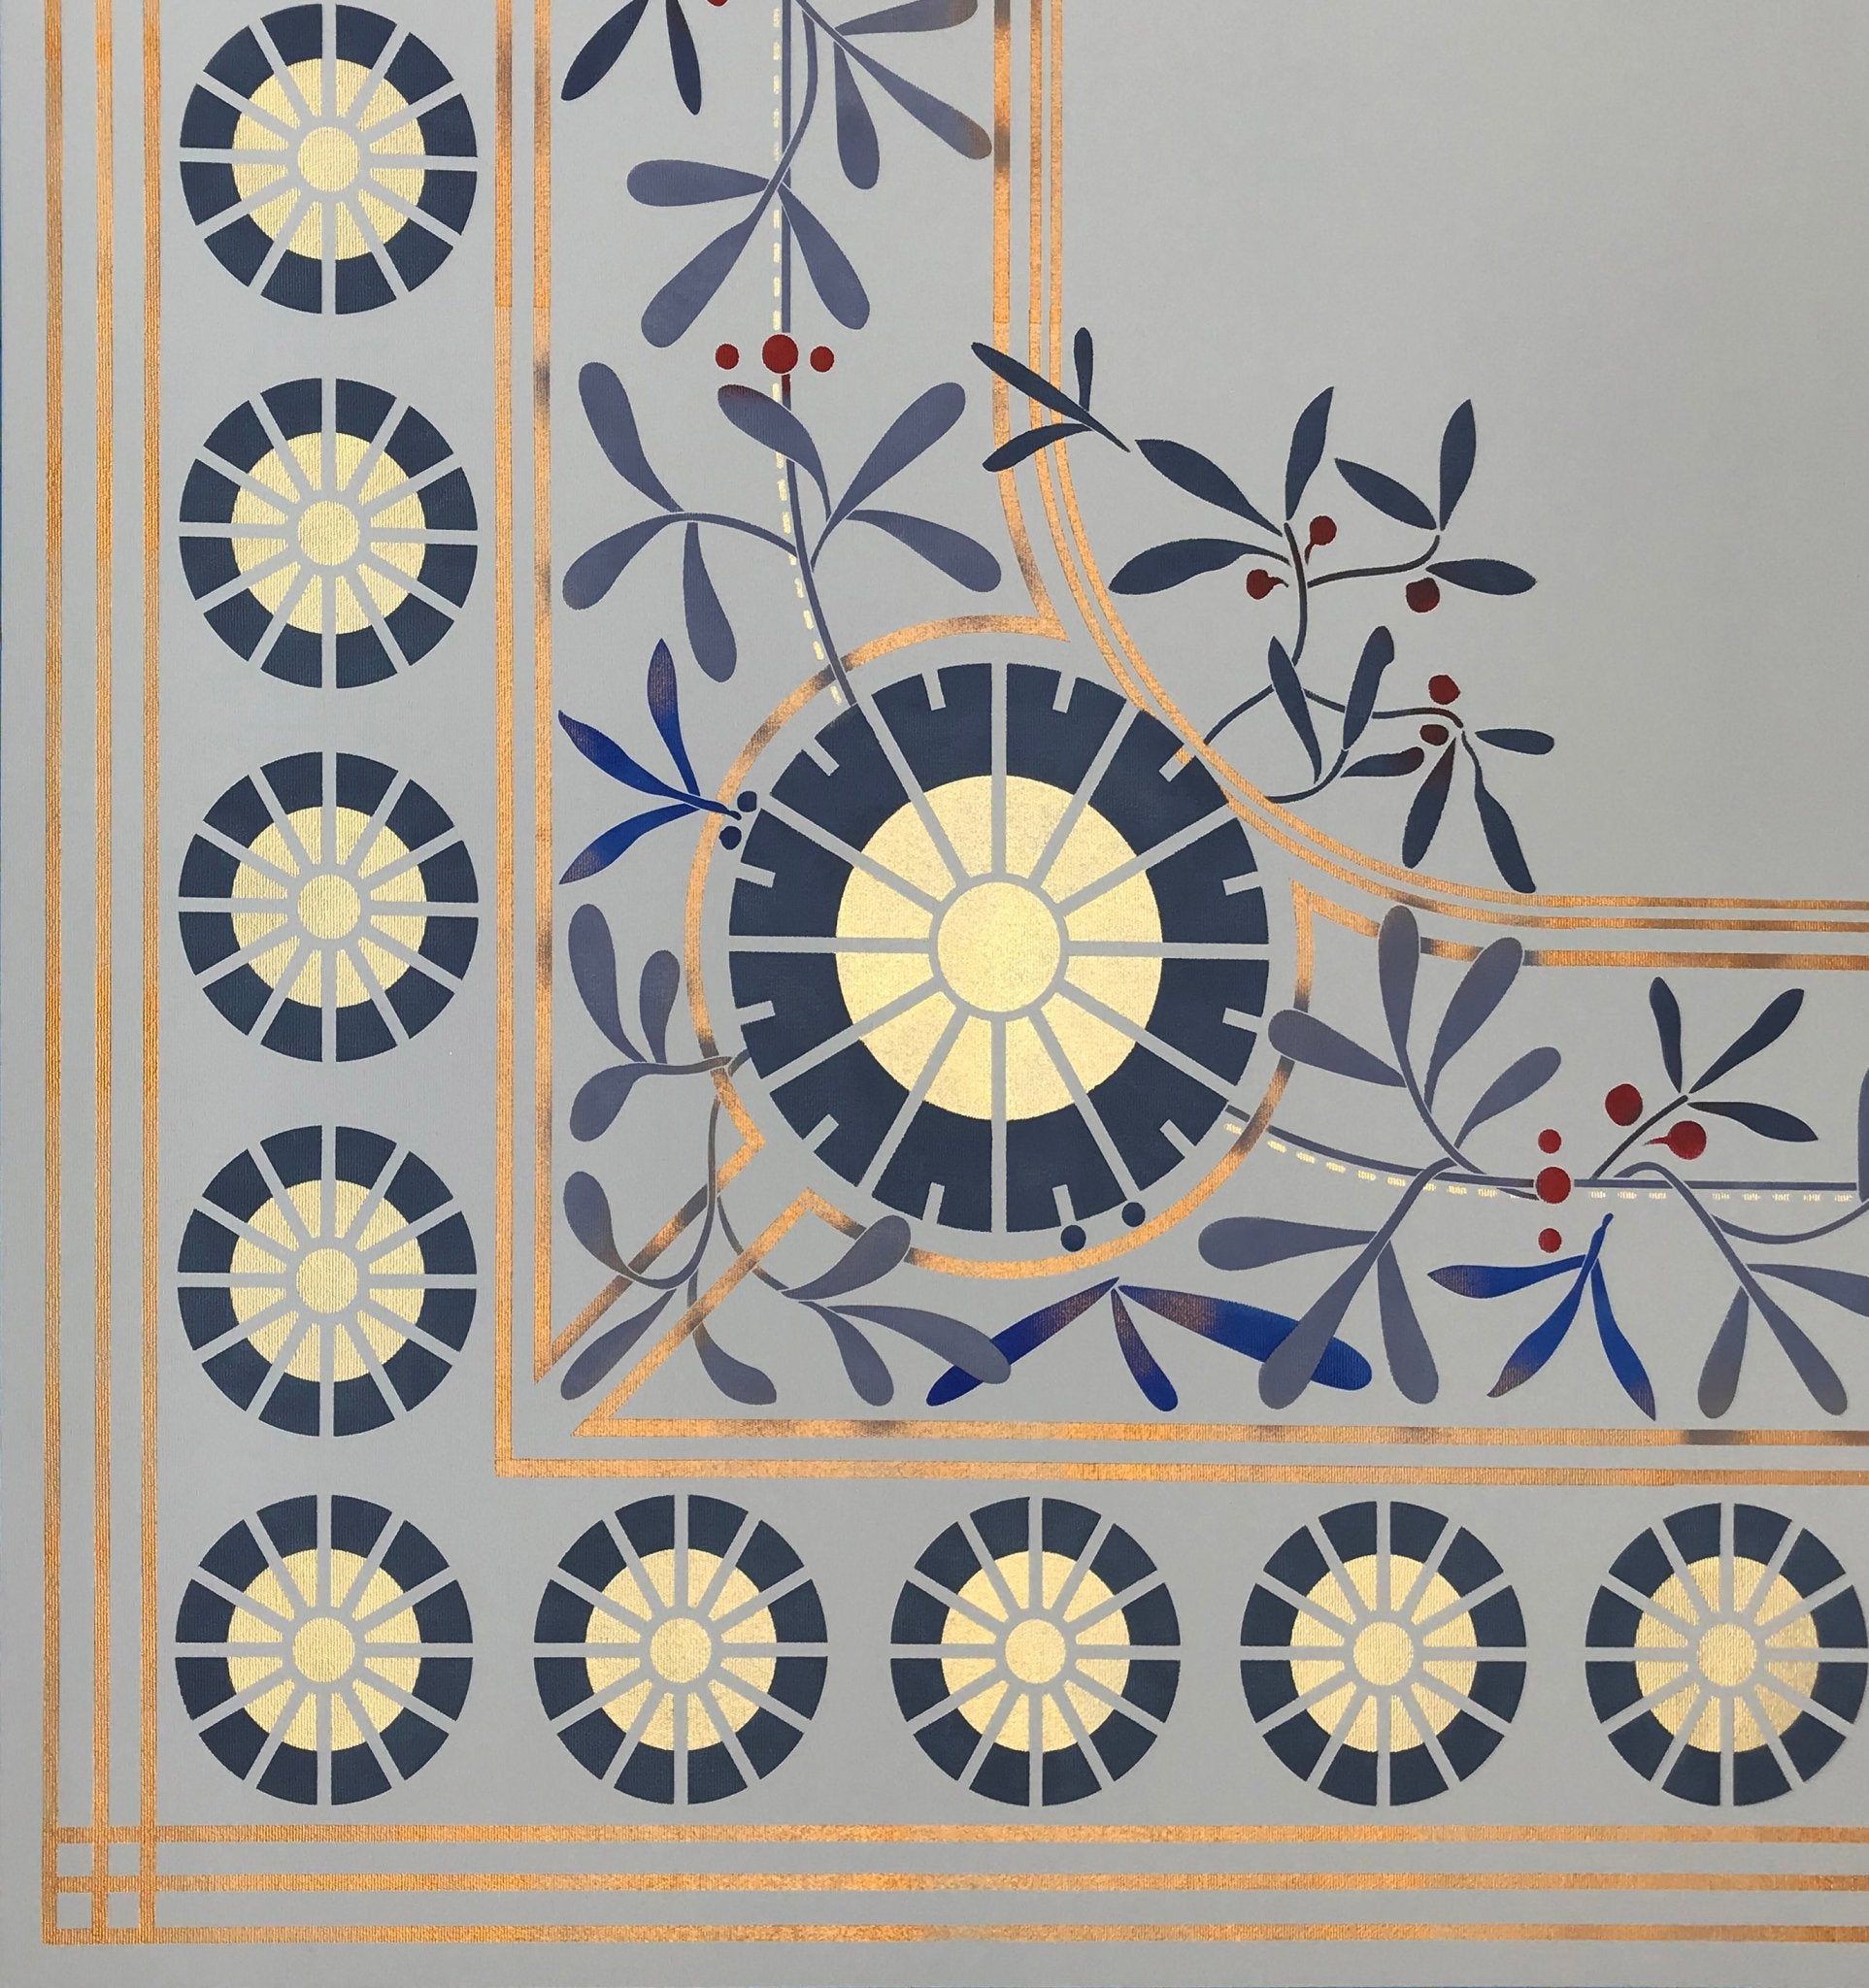 Close up corner image of this floorcloth.  The design is based on a ceiling pattern in the 1889 Robert Graves Co. Wallpaper Catalog.